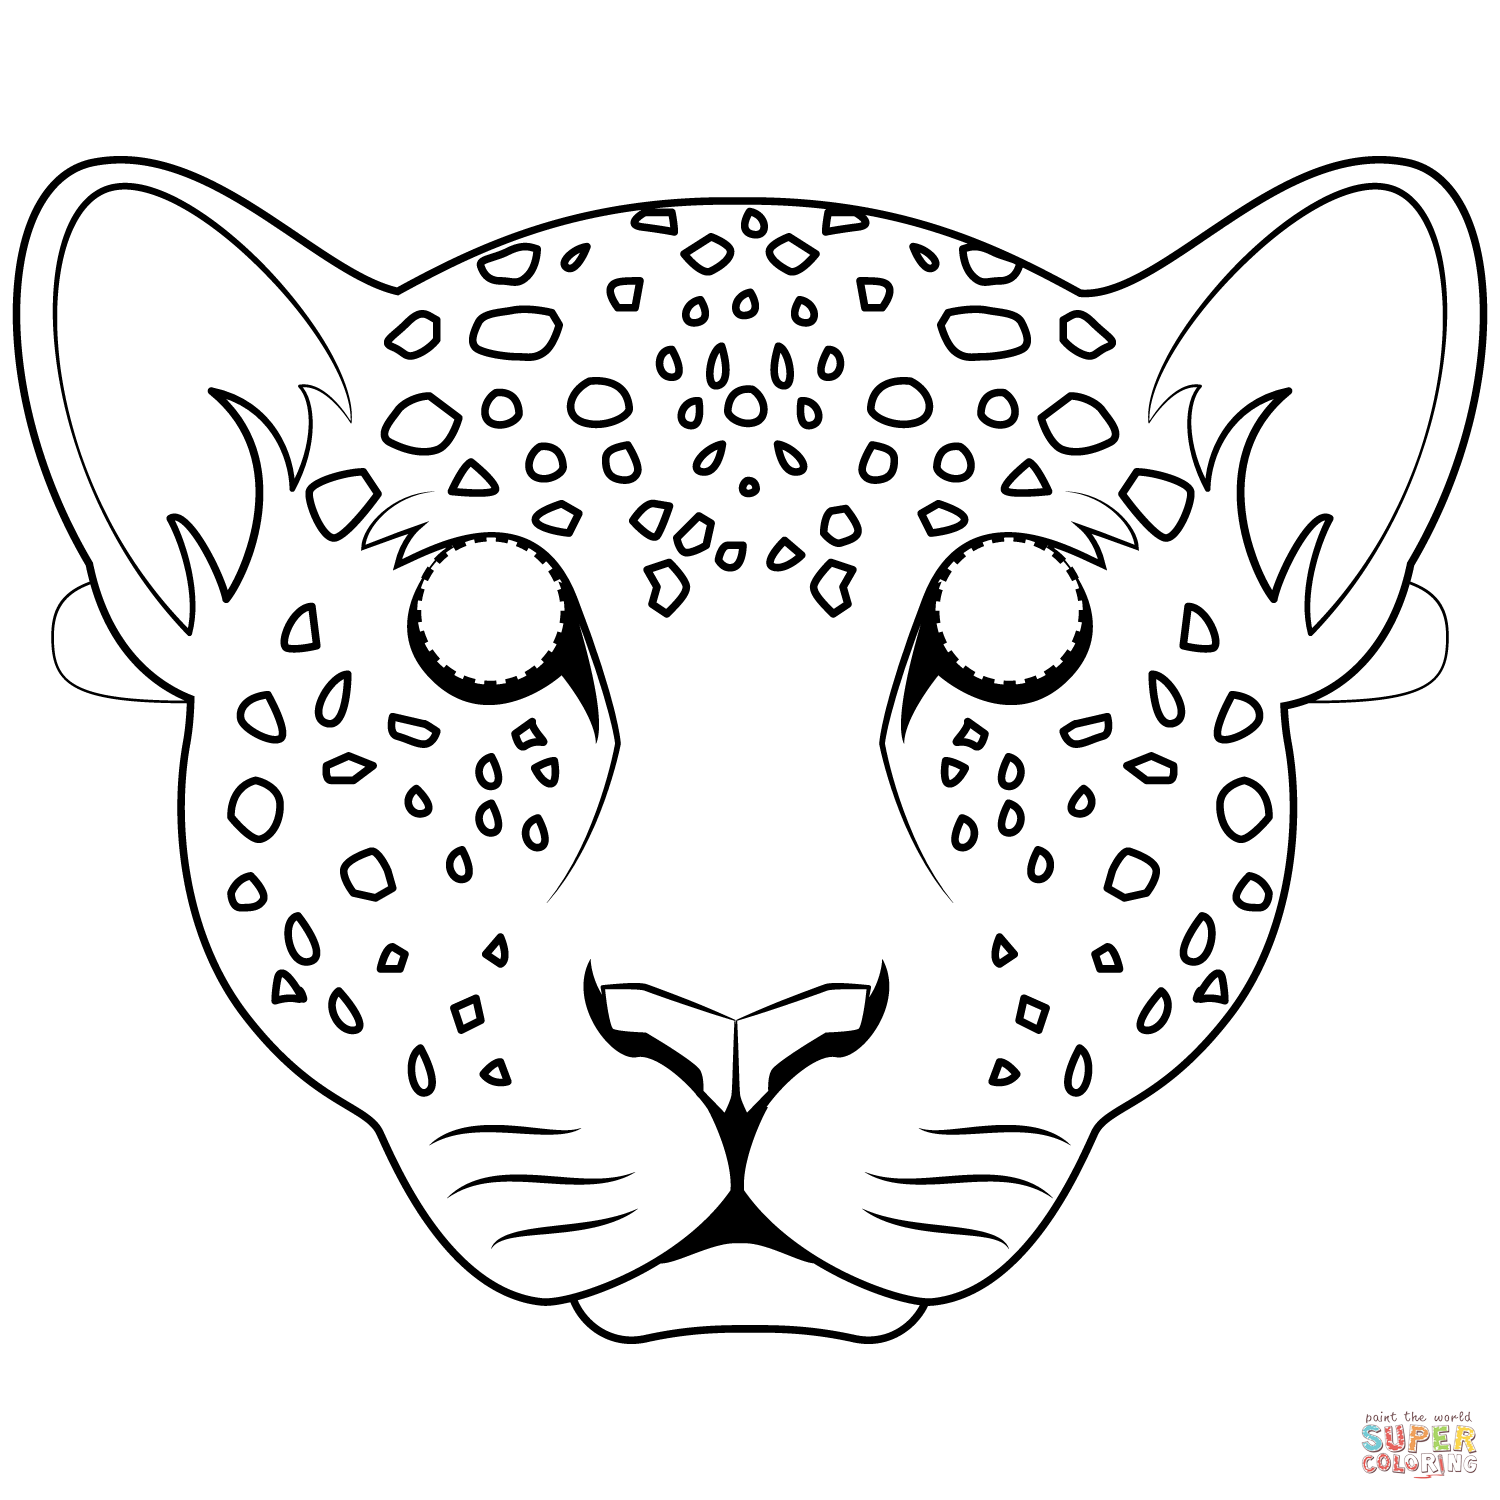 Leopard mask coloring page free printable coloring pages